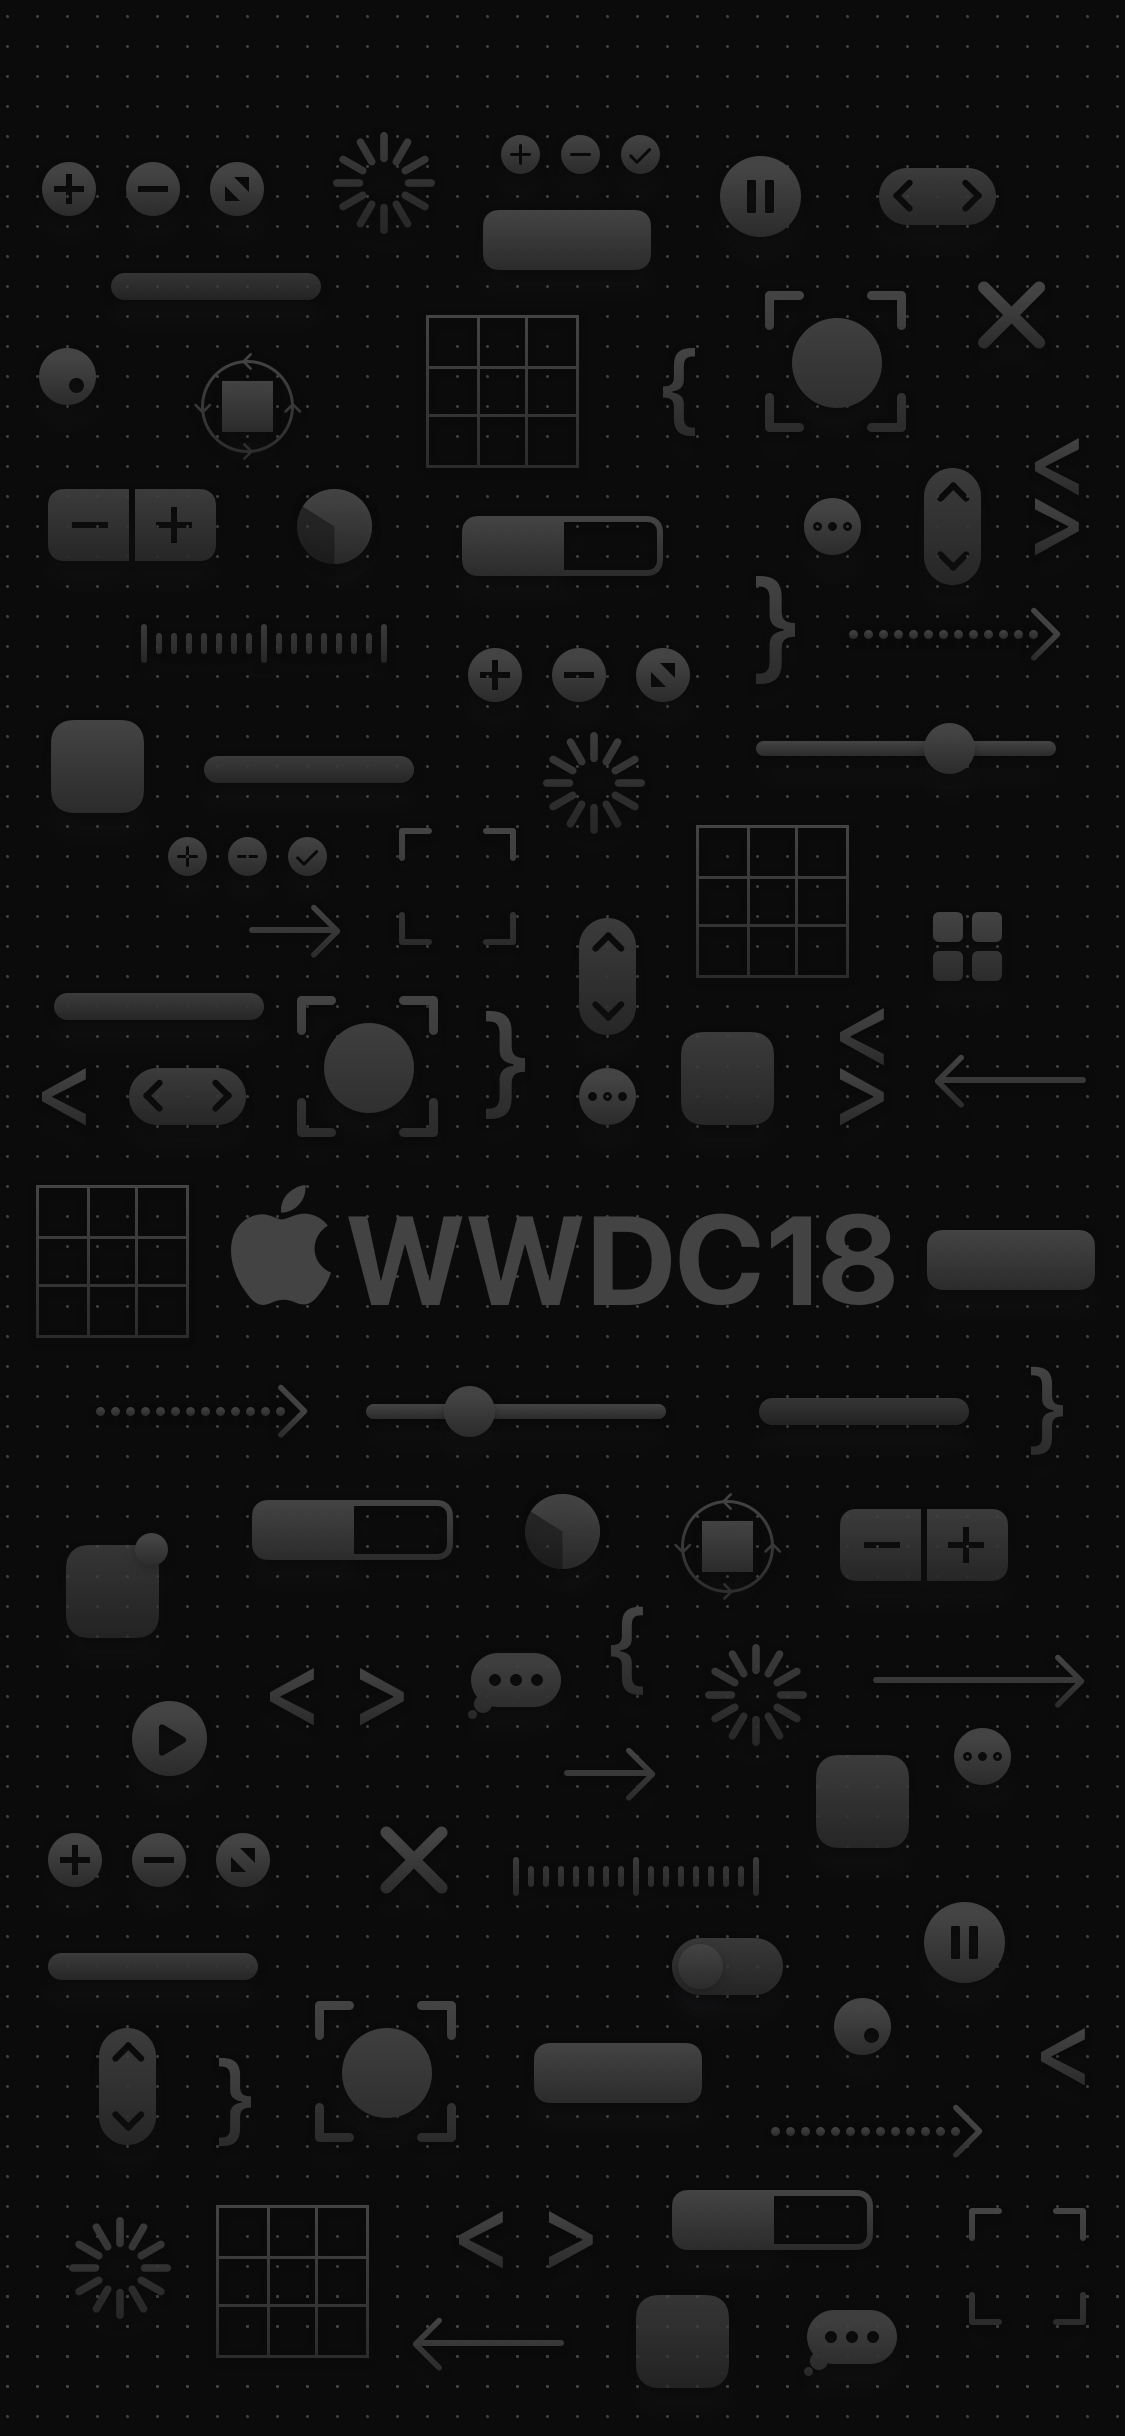 WWDC18 Wallpaper iPhones Available